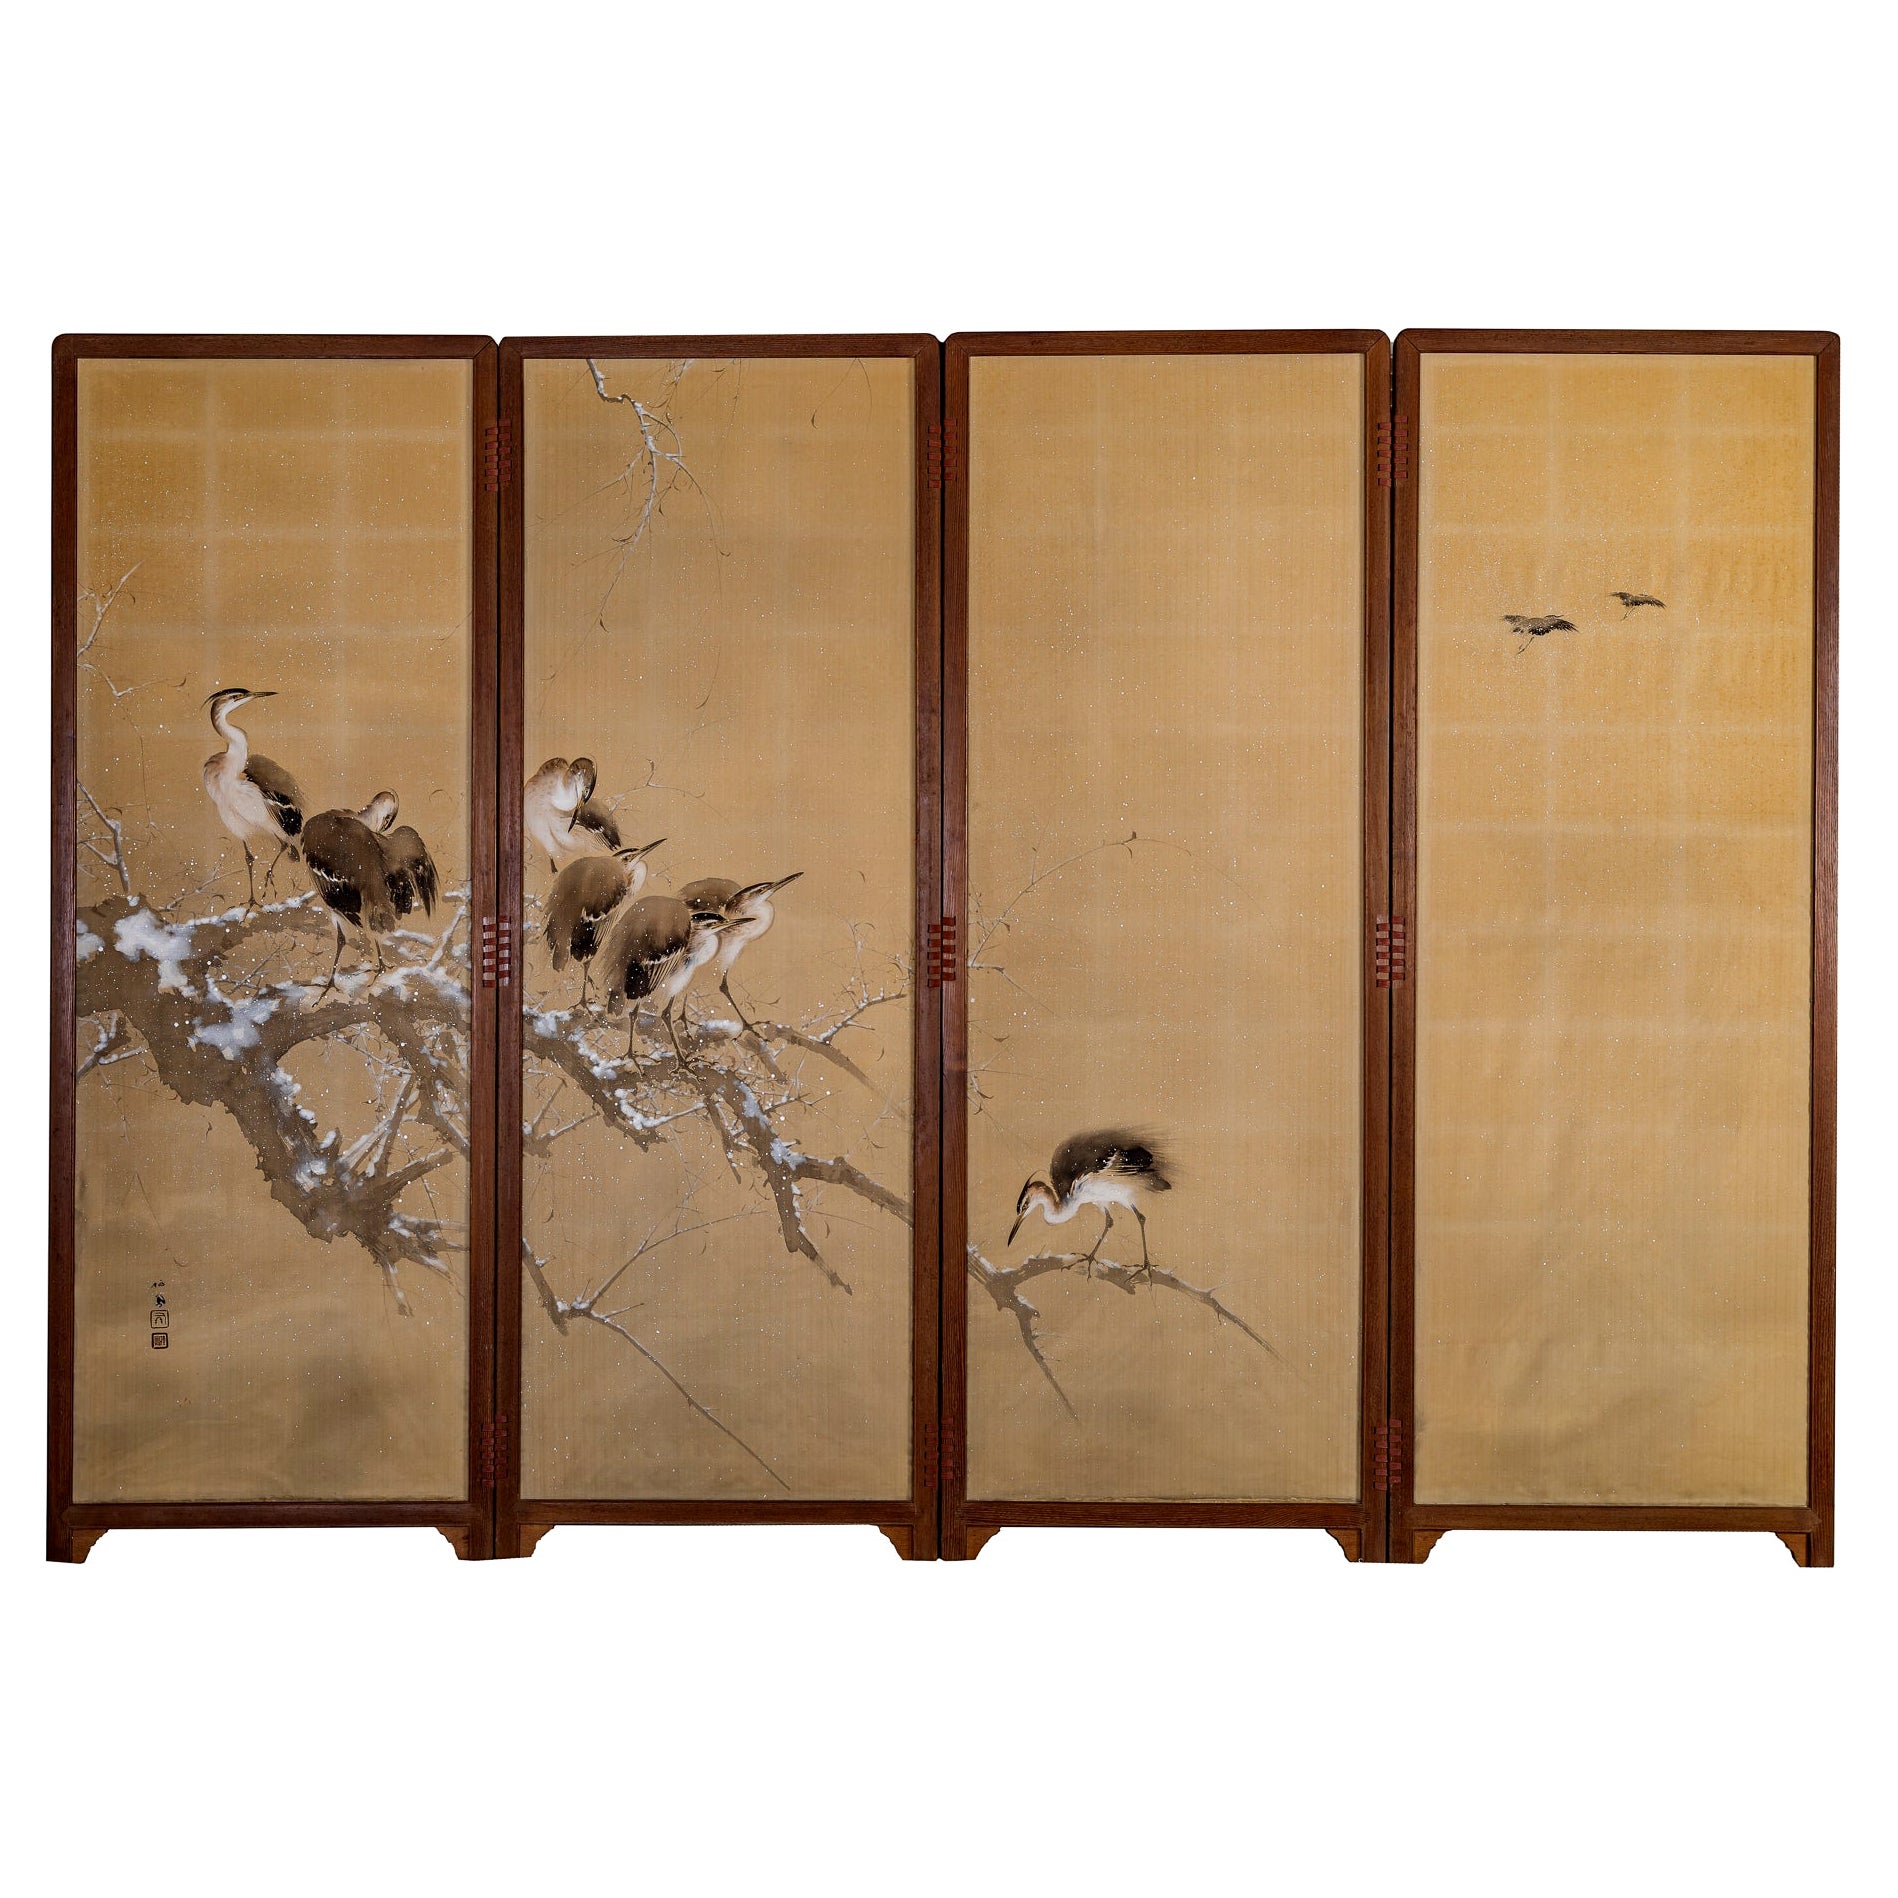 Japanese Four Panel Screen: Herons on Snow Laden Branch